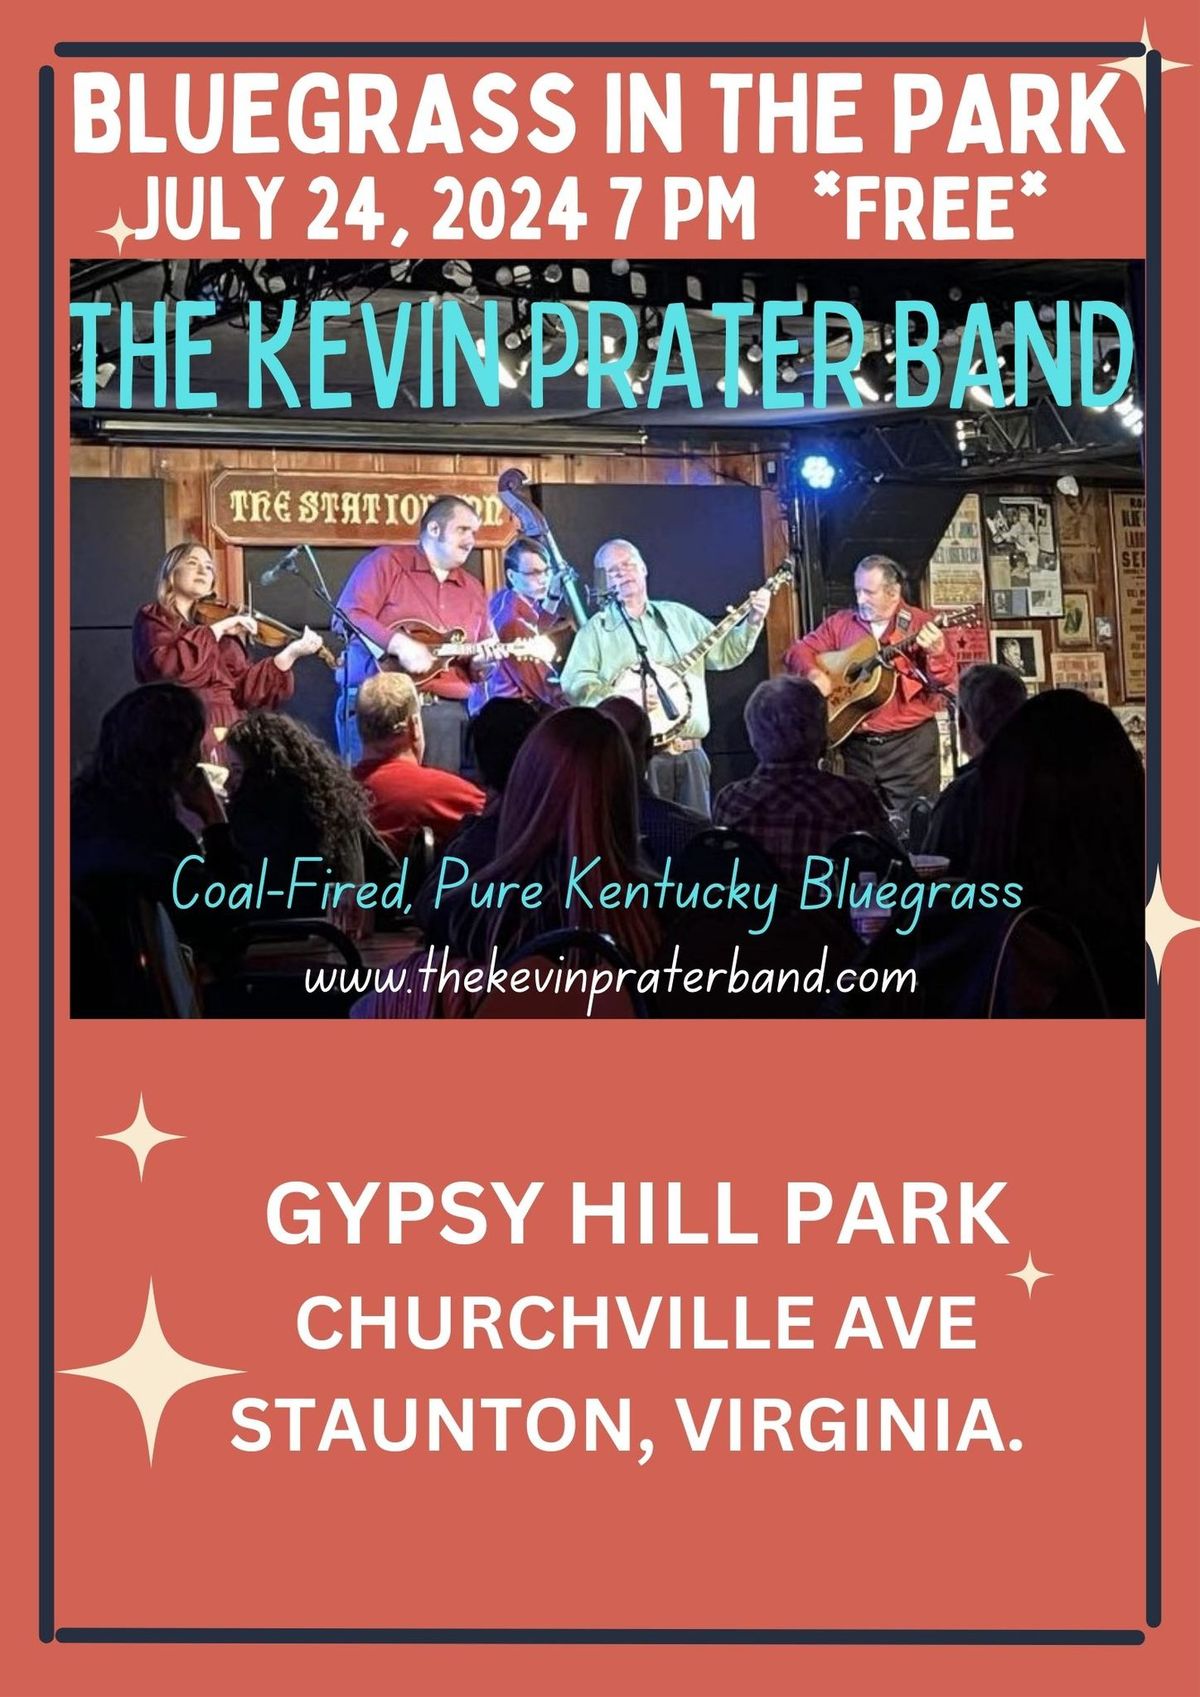 The Kevin Prater Band returns to Bluegrass in the Park